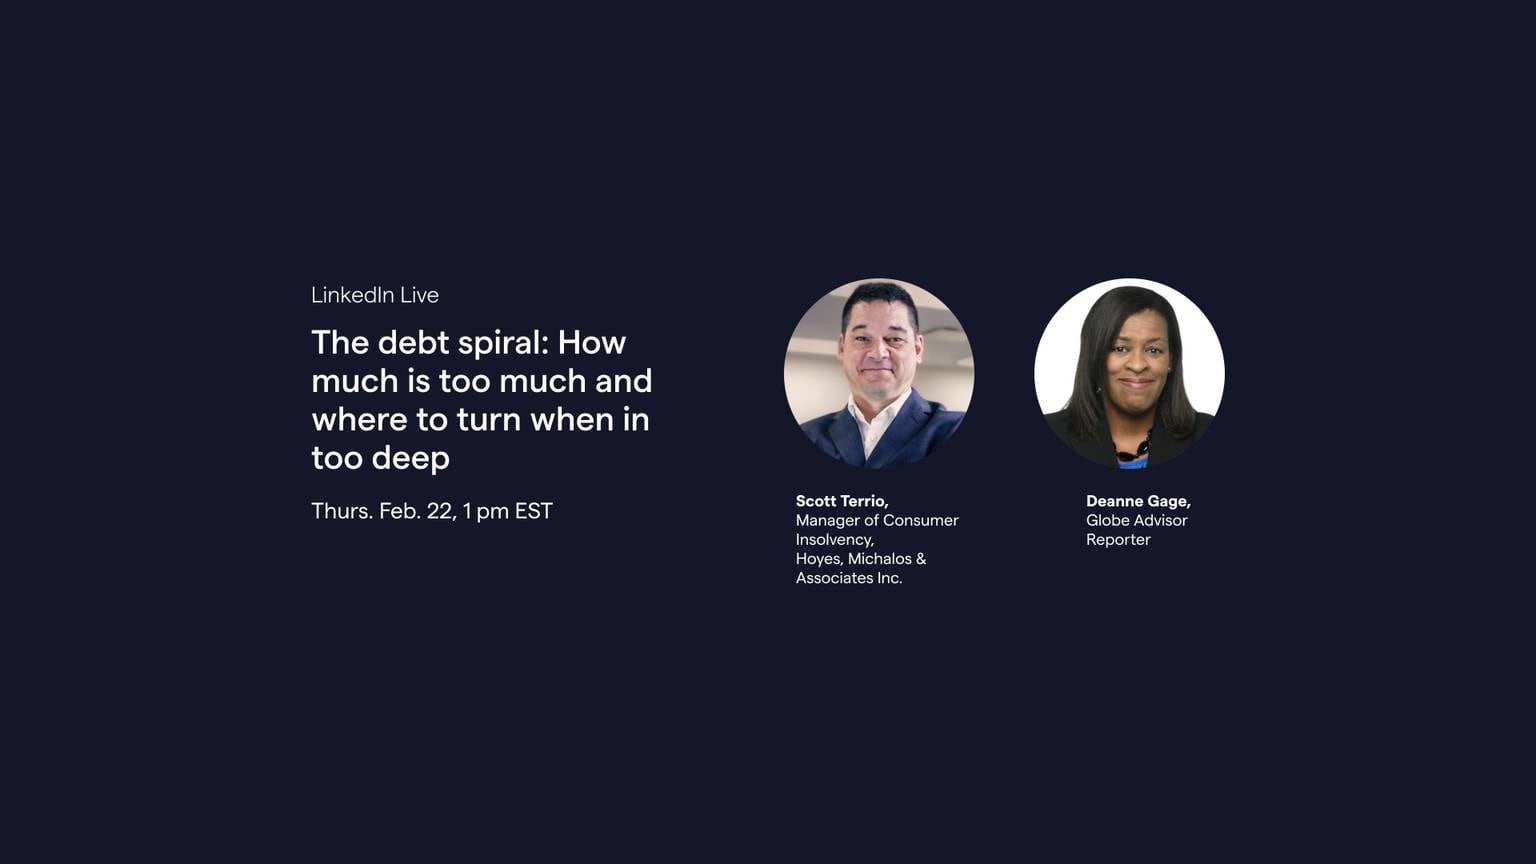 Video: The debt spiral: How much is too much and where to turn when in too deep [Video]